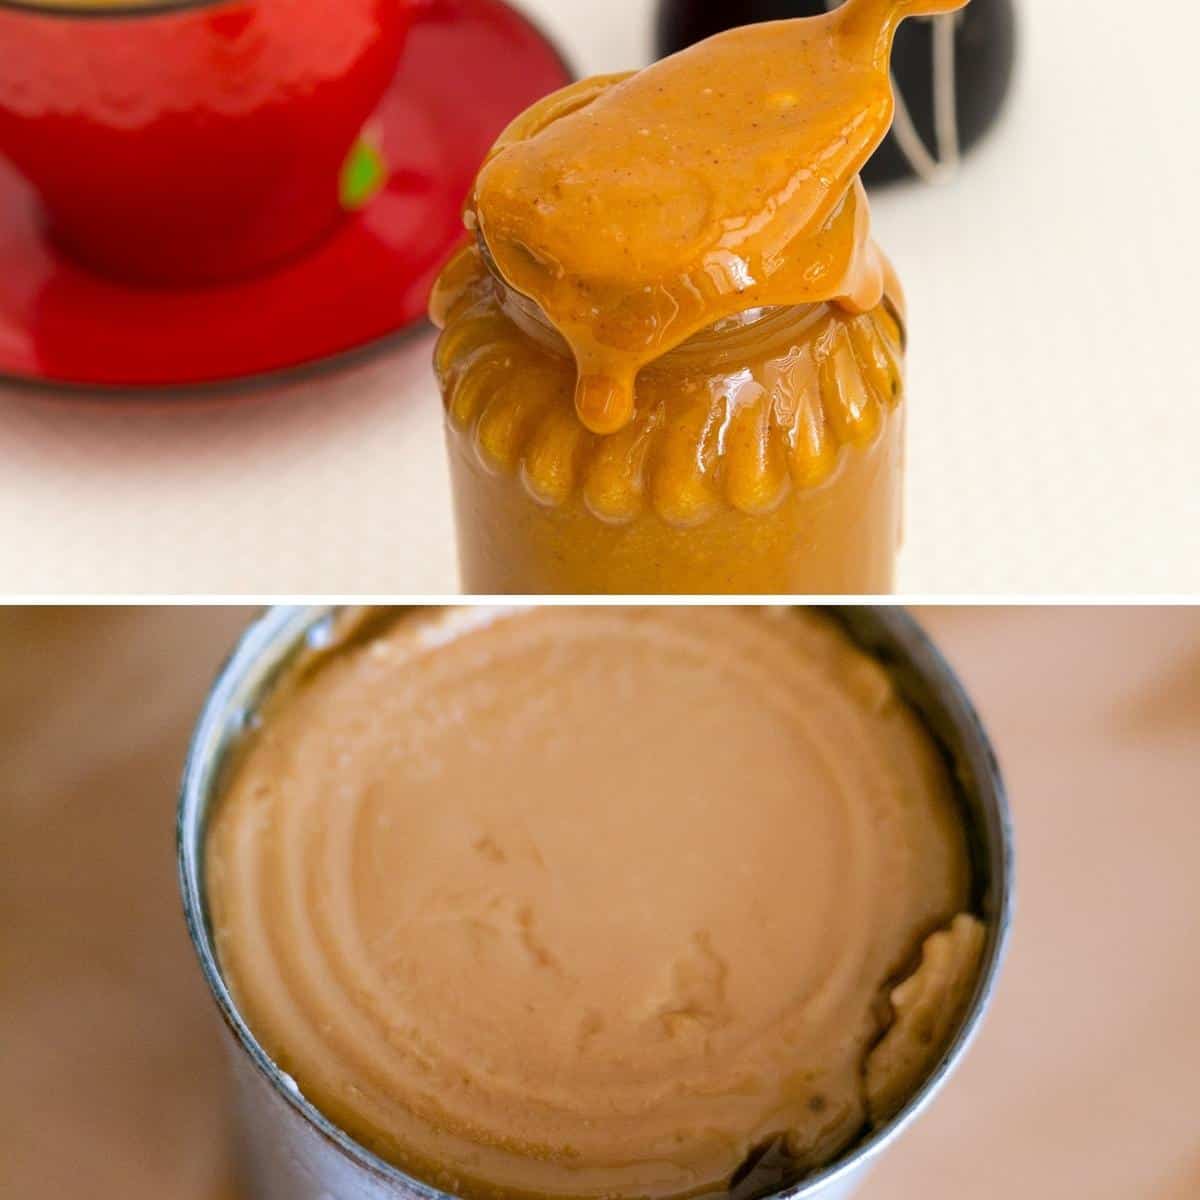 Showing the two dulce de leche in mason jar or can.